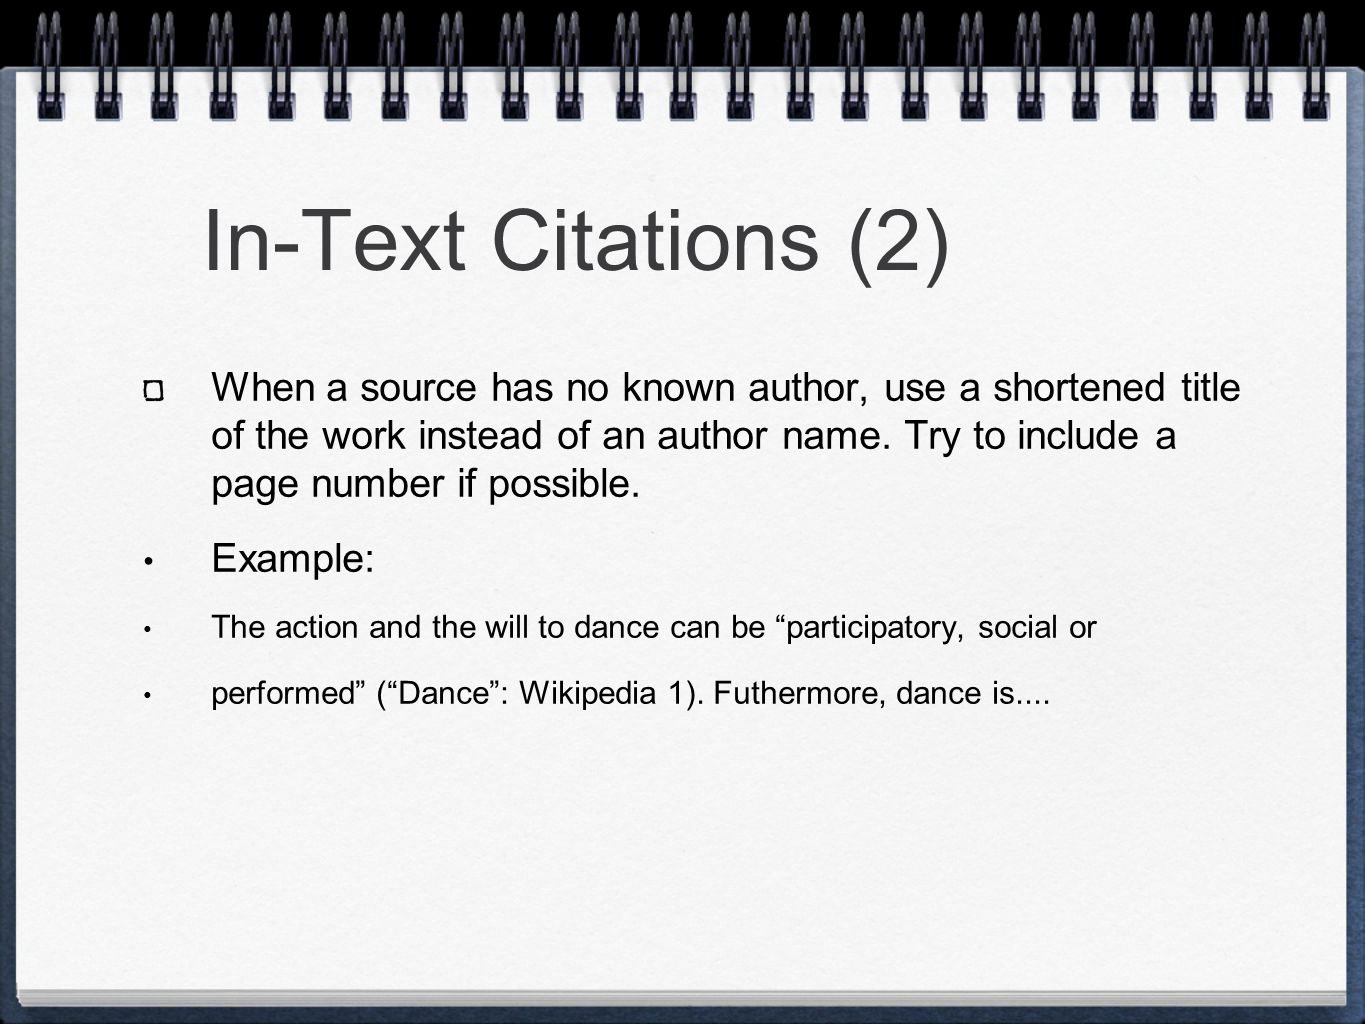 In-Text Citations (2) When a source has no known author, use a shortened title of the work instead of an author name.